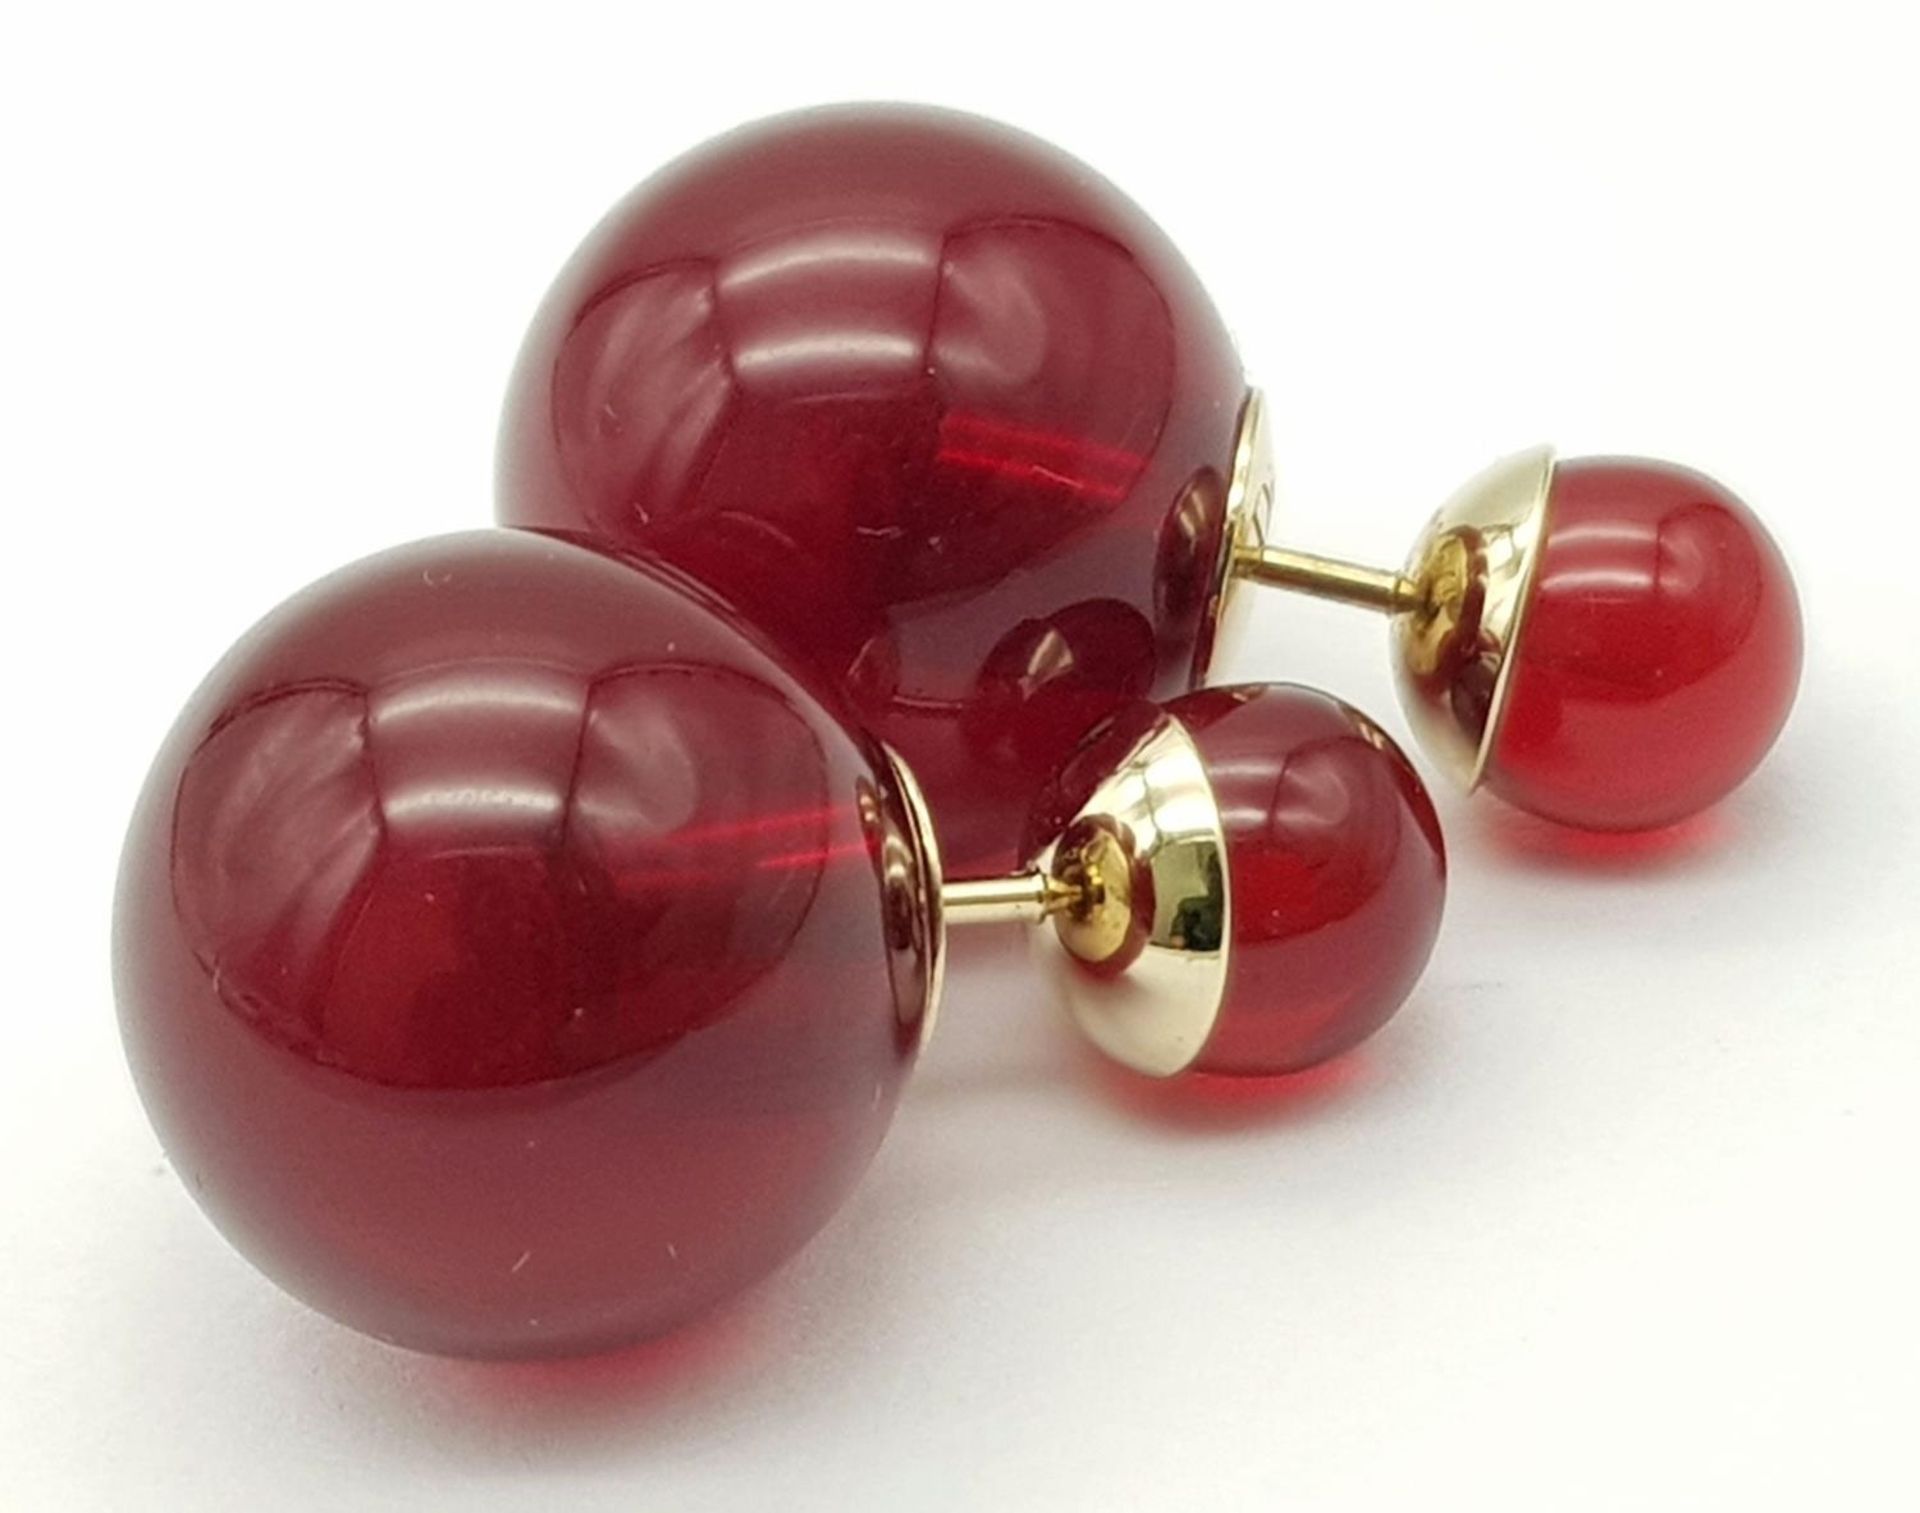 A Pair of Dior Cherry Red Orb Earrings. Comes in Dior packaging. - Image 2 of 5